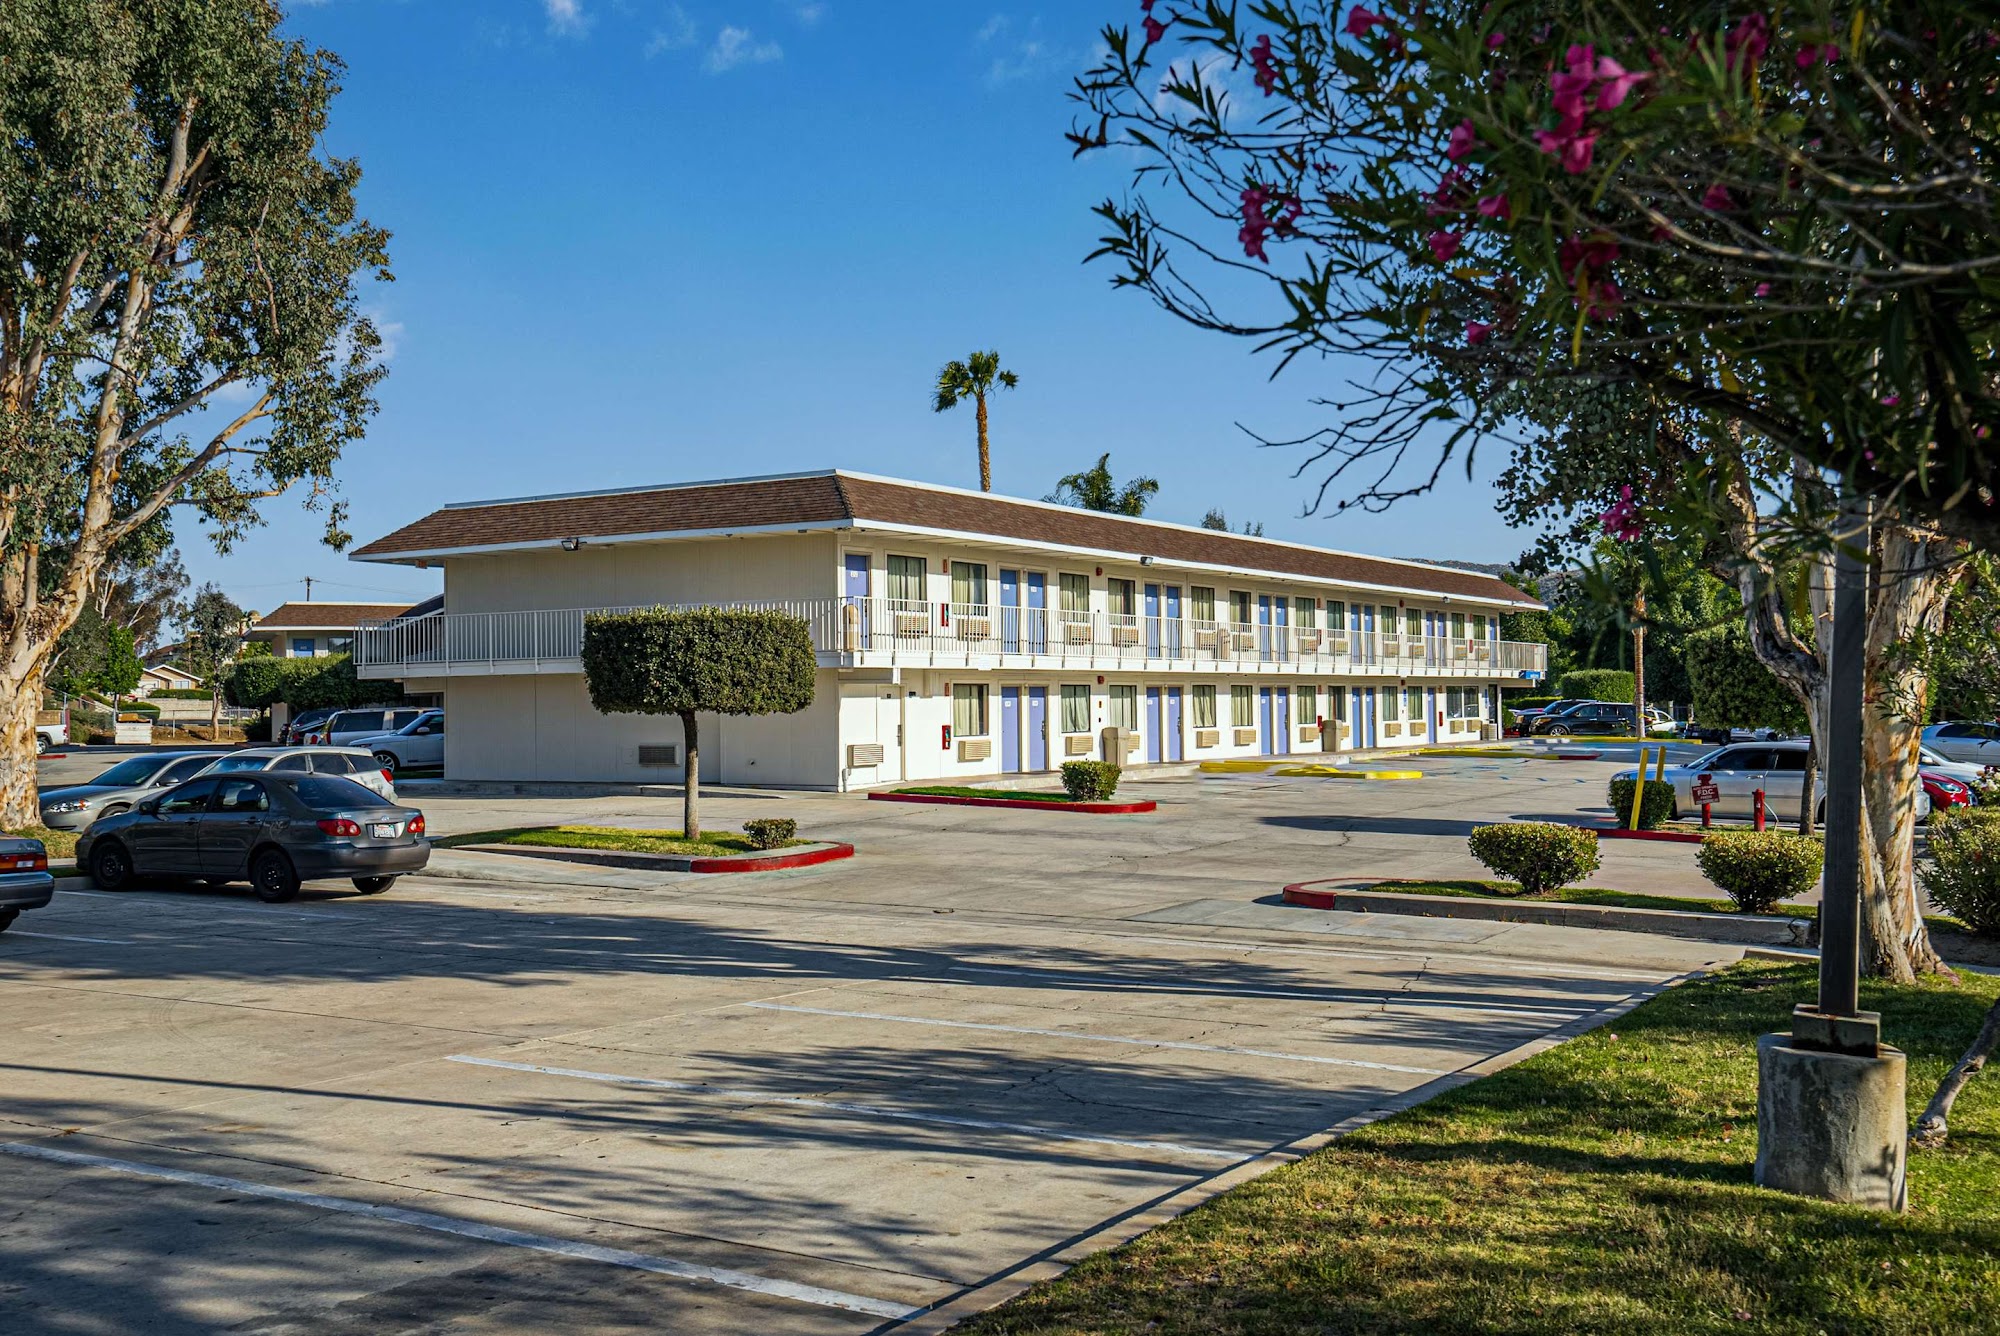 Motel 6 Temecula, CA - Historic Old Town